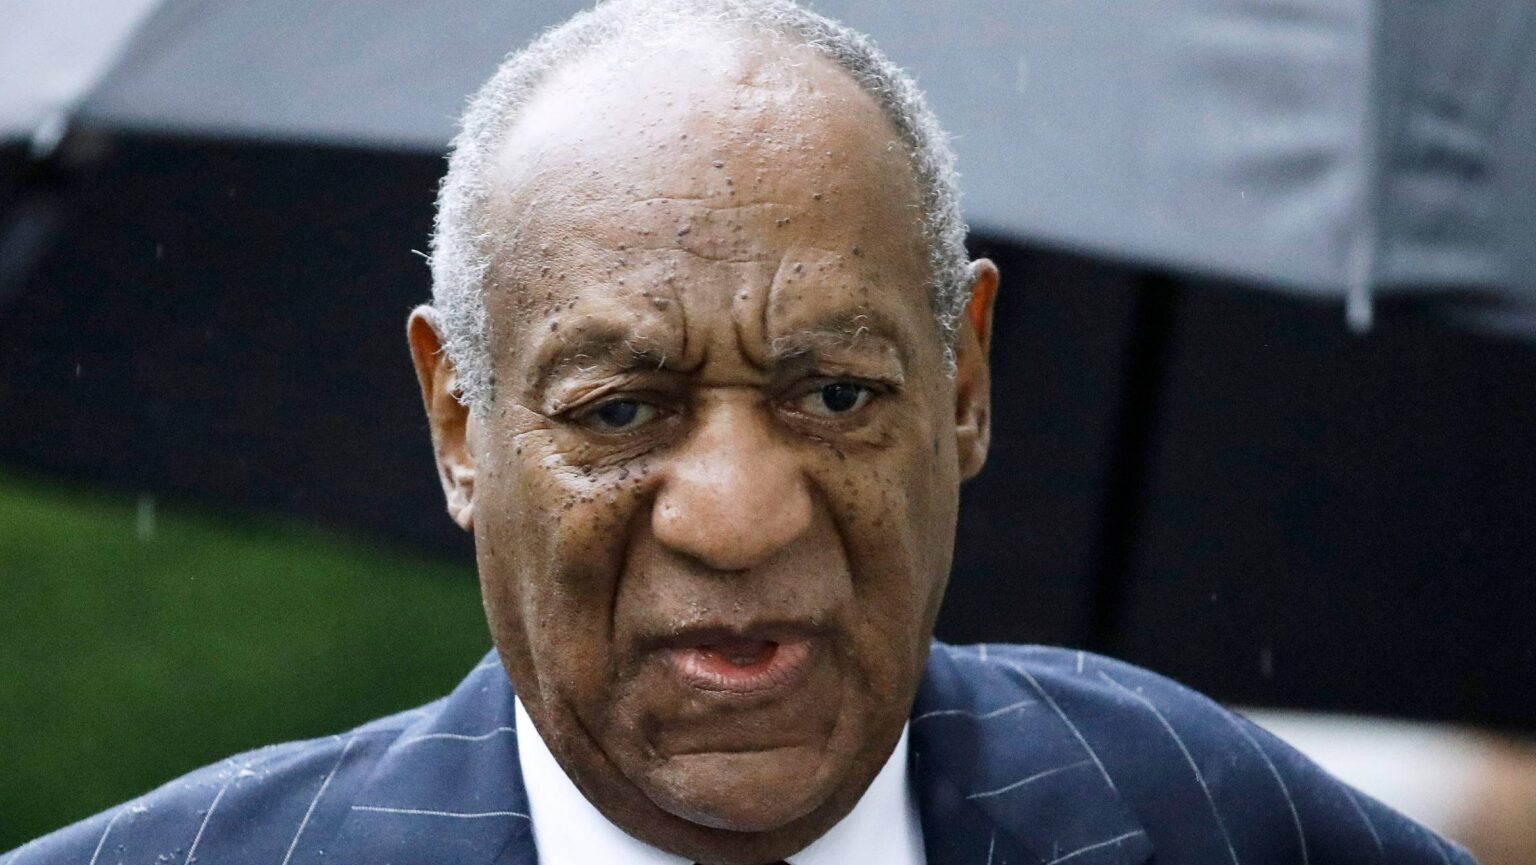 A new mugshot of infamous actor Bill Cosby shows him smirking. It looks like the face of a man who doesn't regret his crimes or sentence.